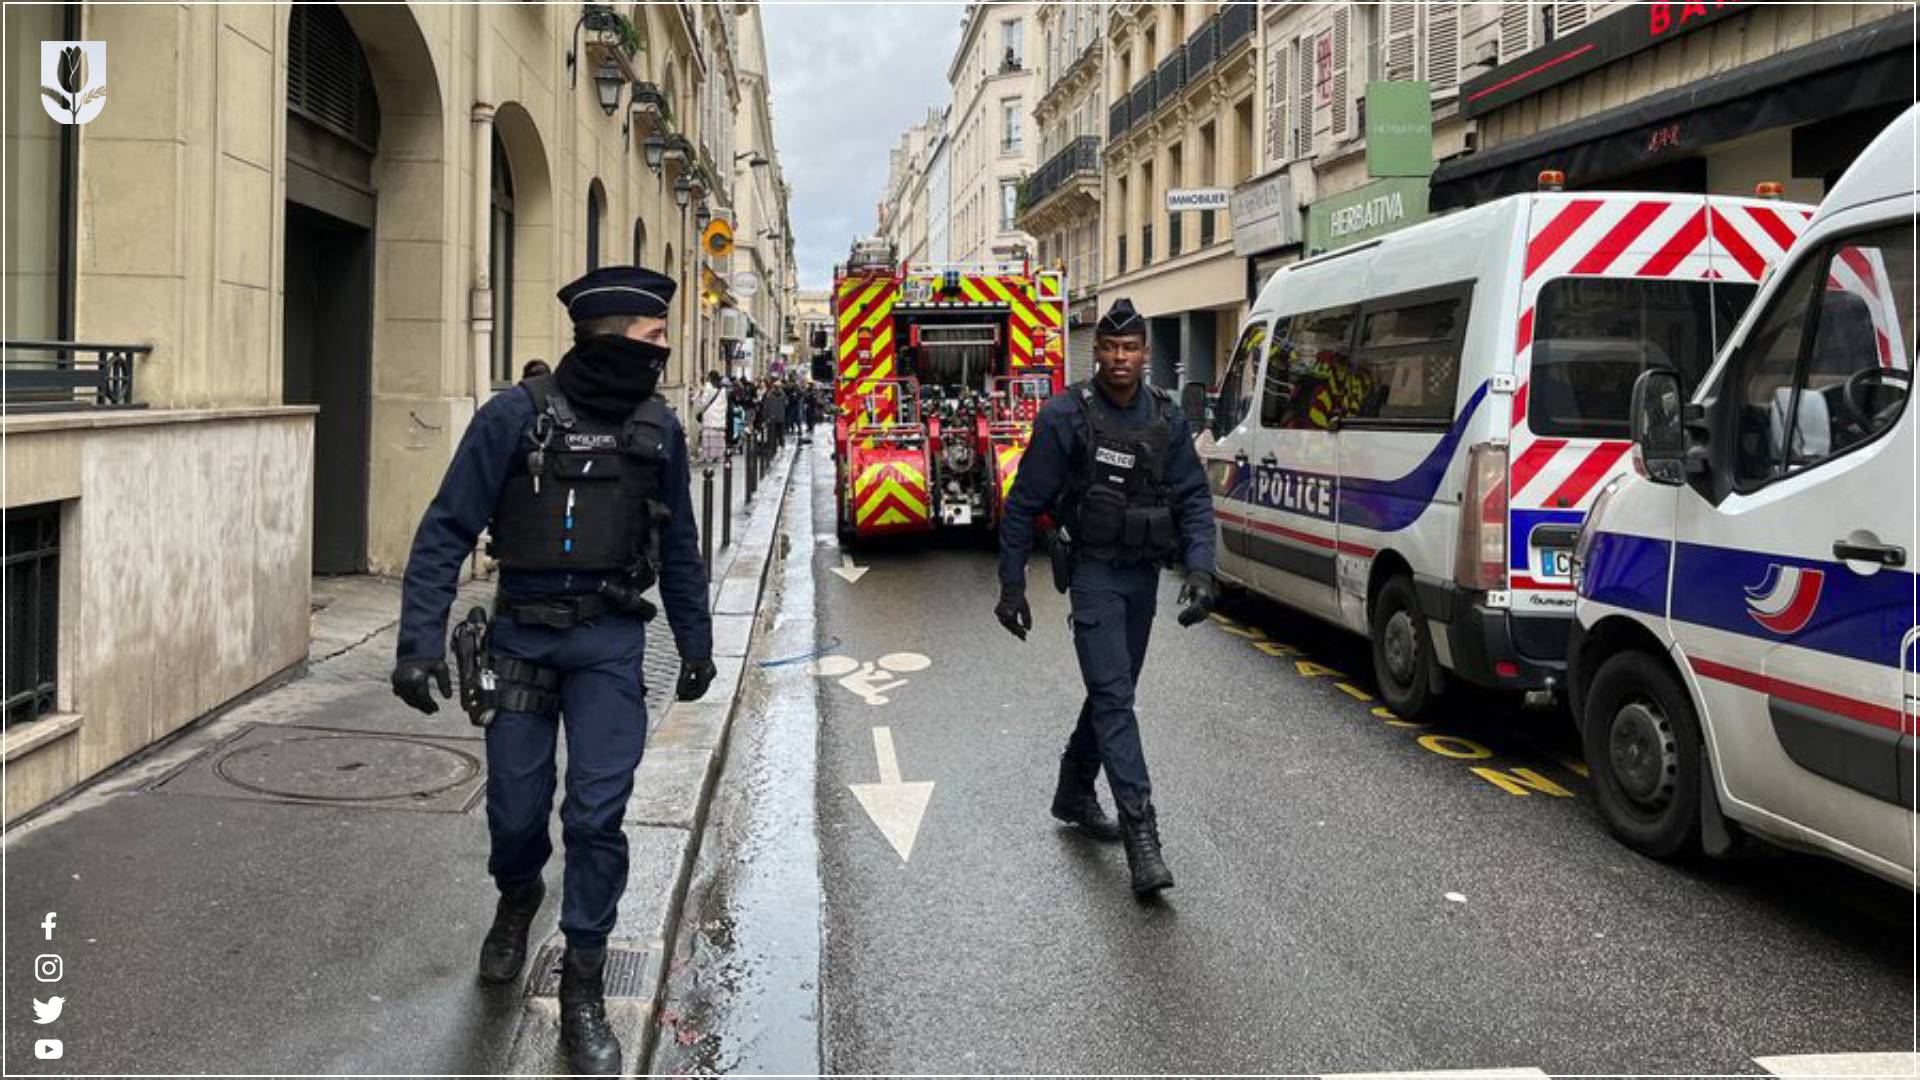  French police and firefighters secure a street after a shooting in a central district of Paris, on Dec. 23. JULIETTE JABKHIRO/REUTERS